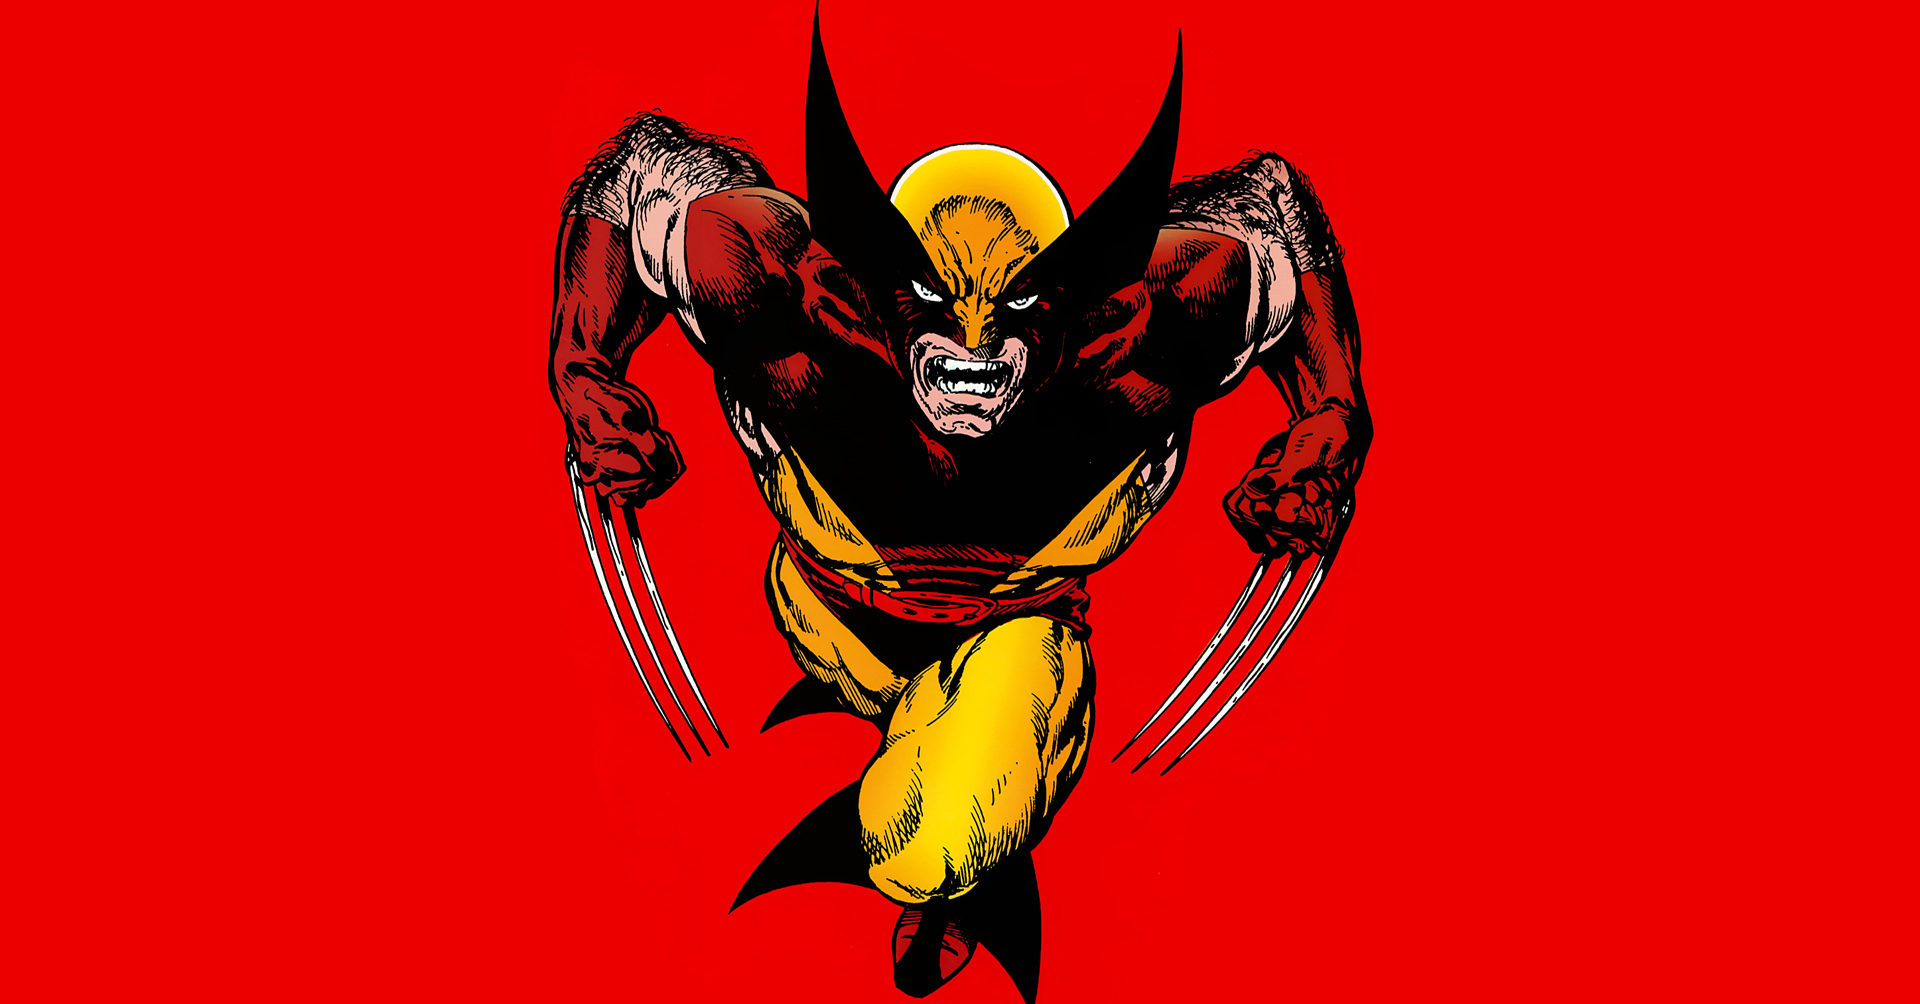  Cartoon  Character Wolverine Marvel Comics Simple Over Red  